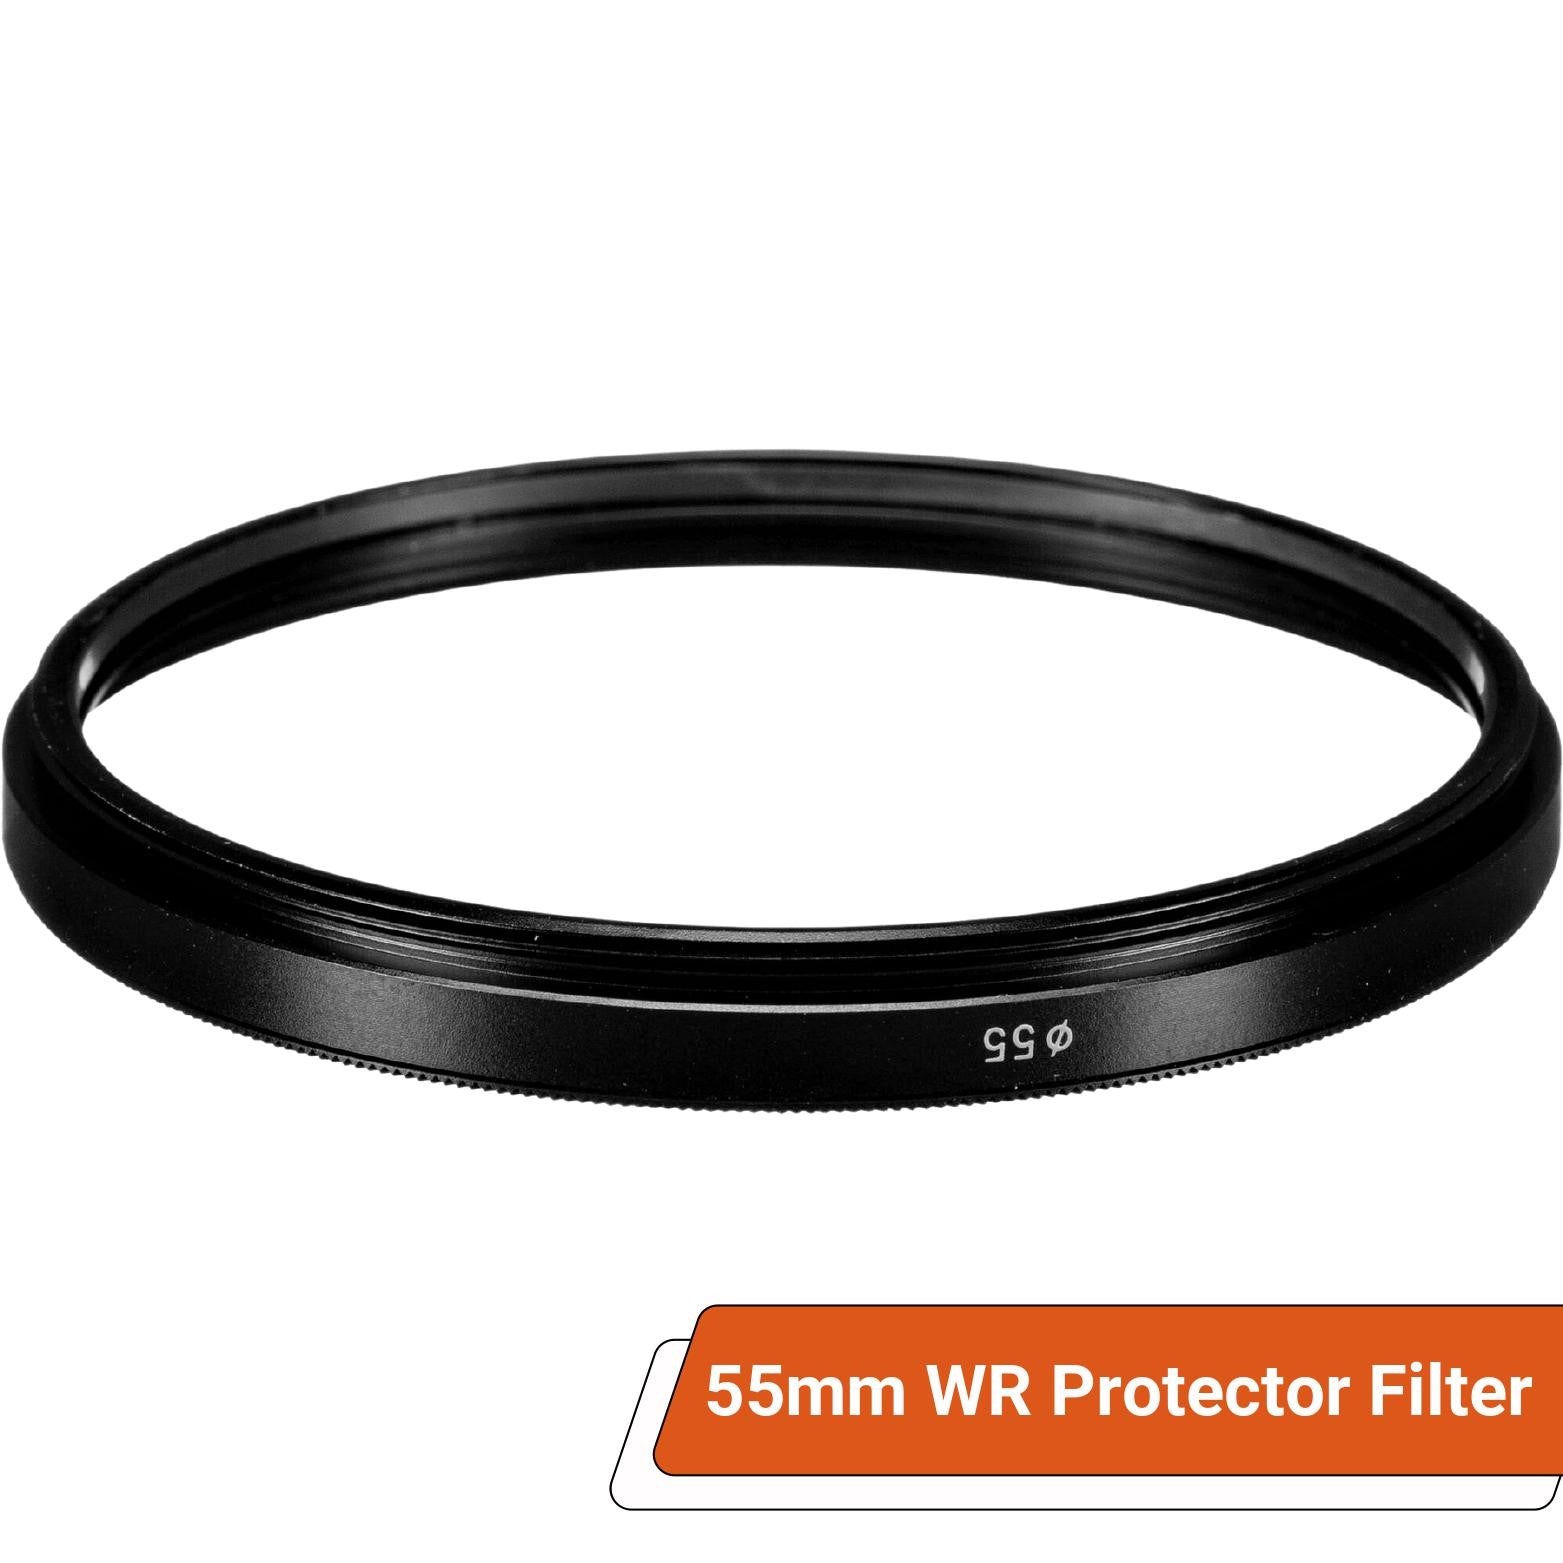 Sigma 55mm WR (Water Repellent) Protector Filter